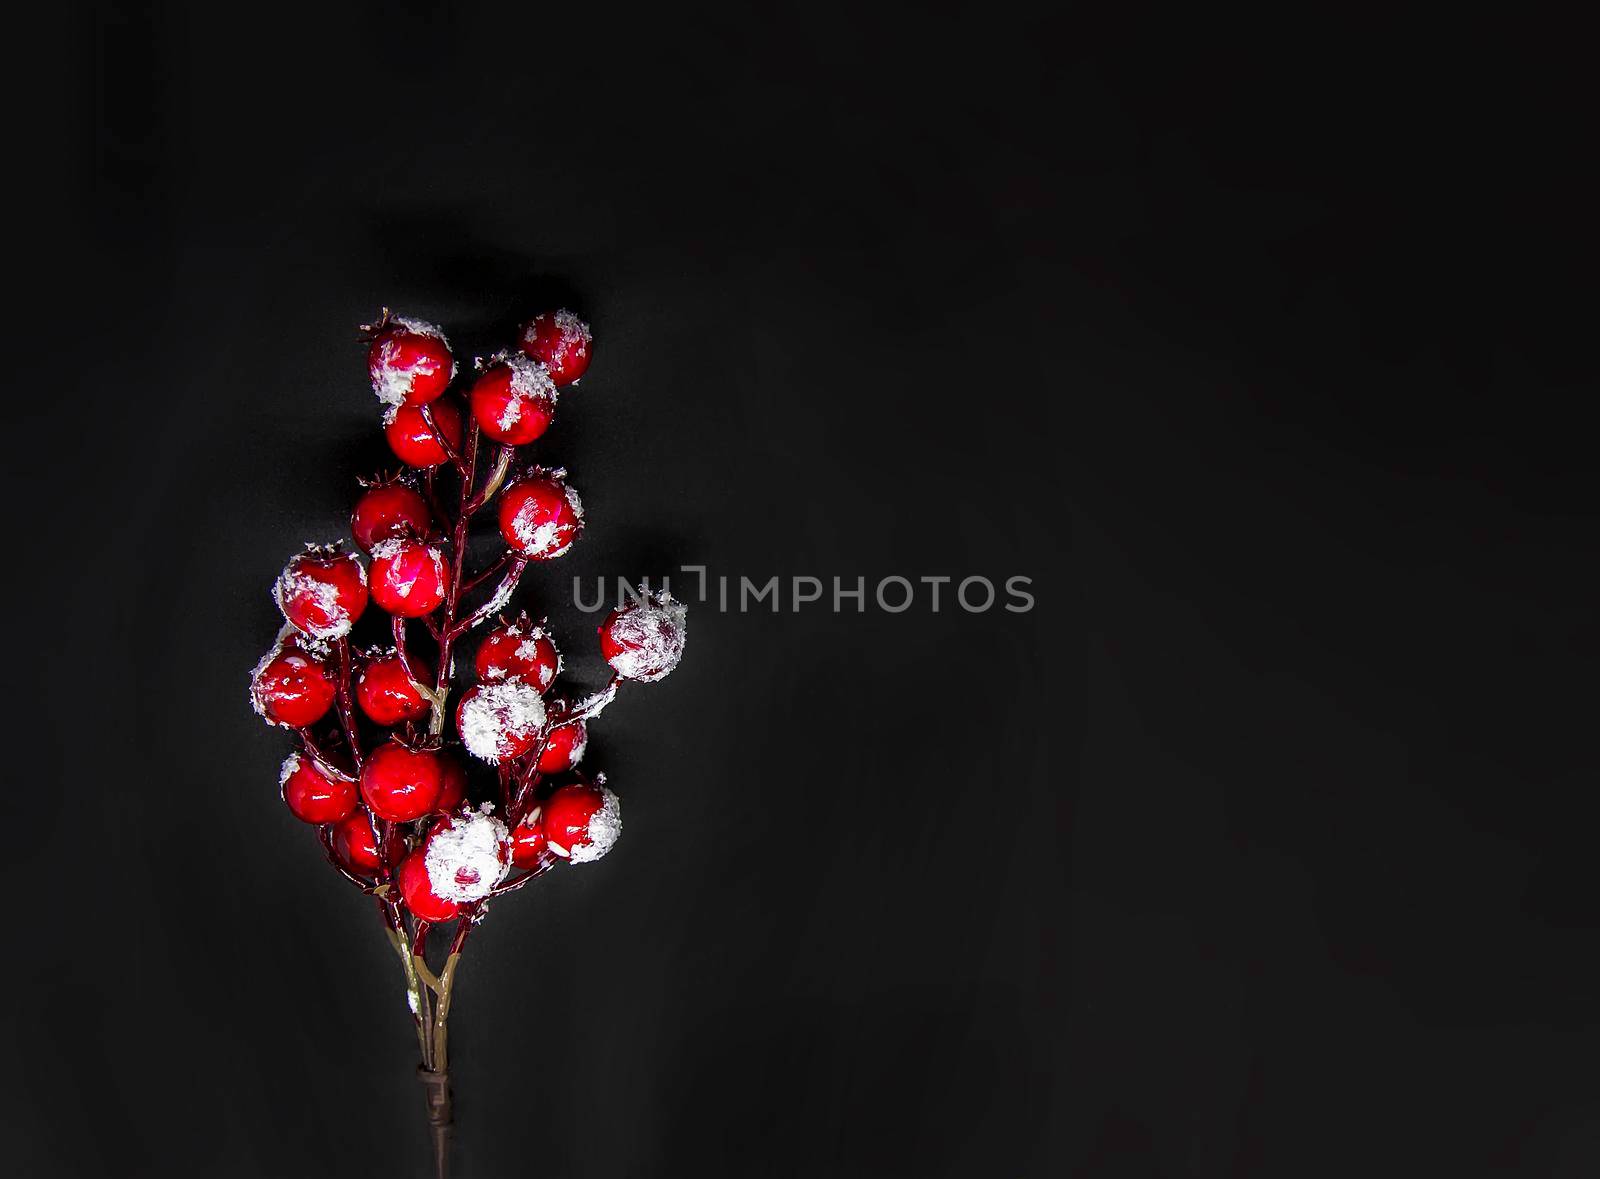 Festive New Year or Christmas background with red holly plant berries in snow on black